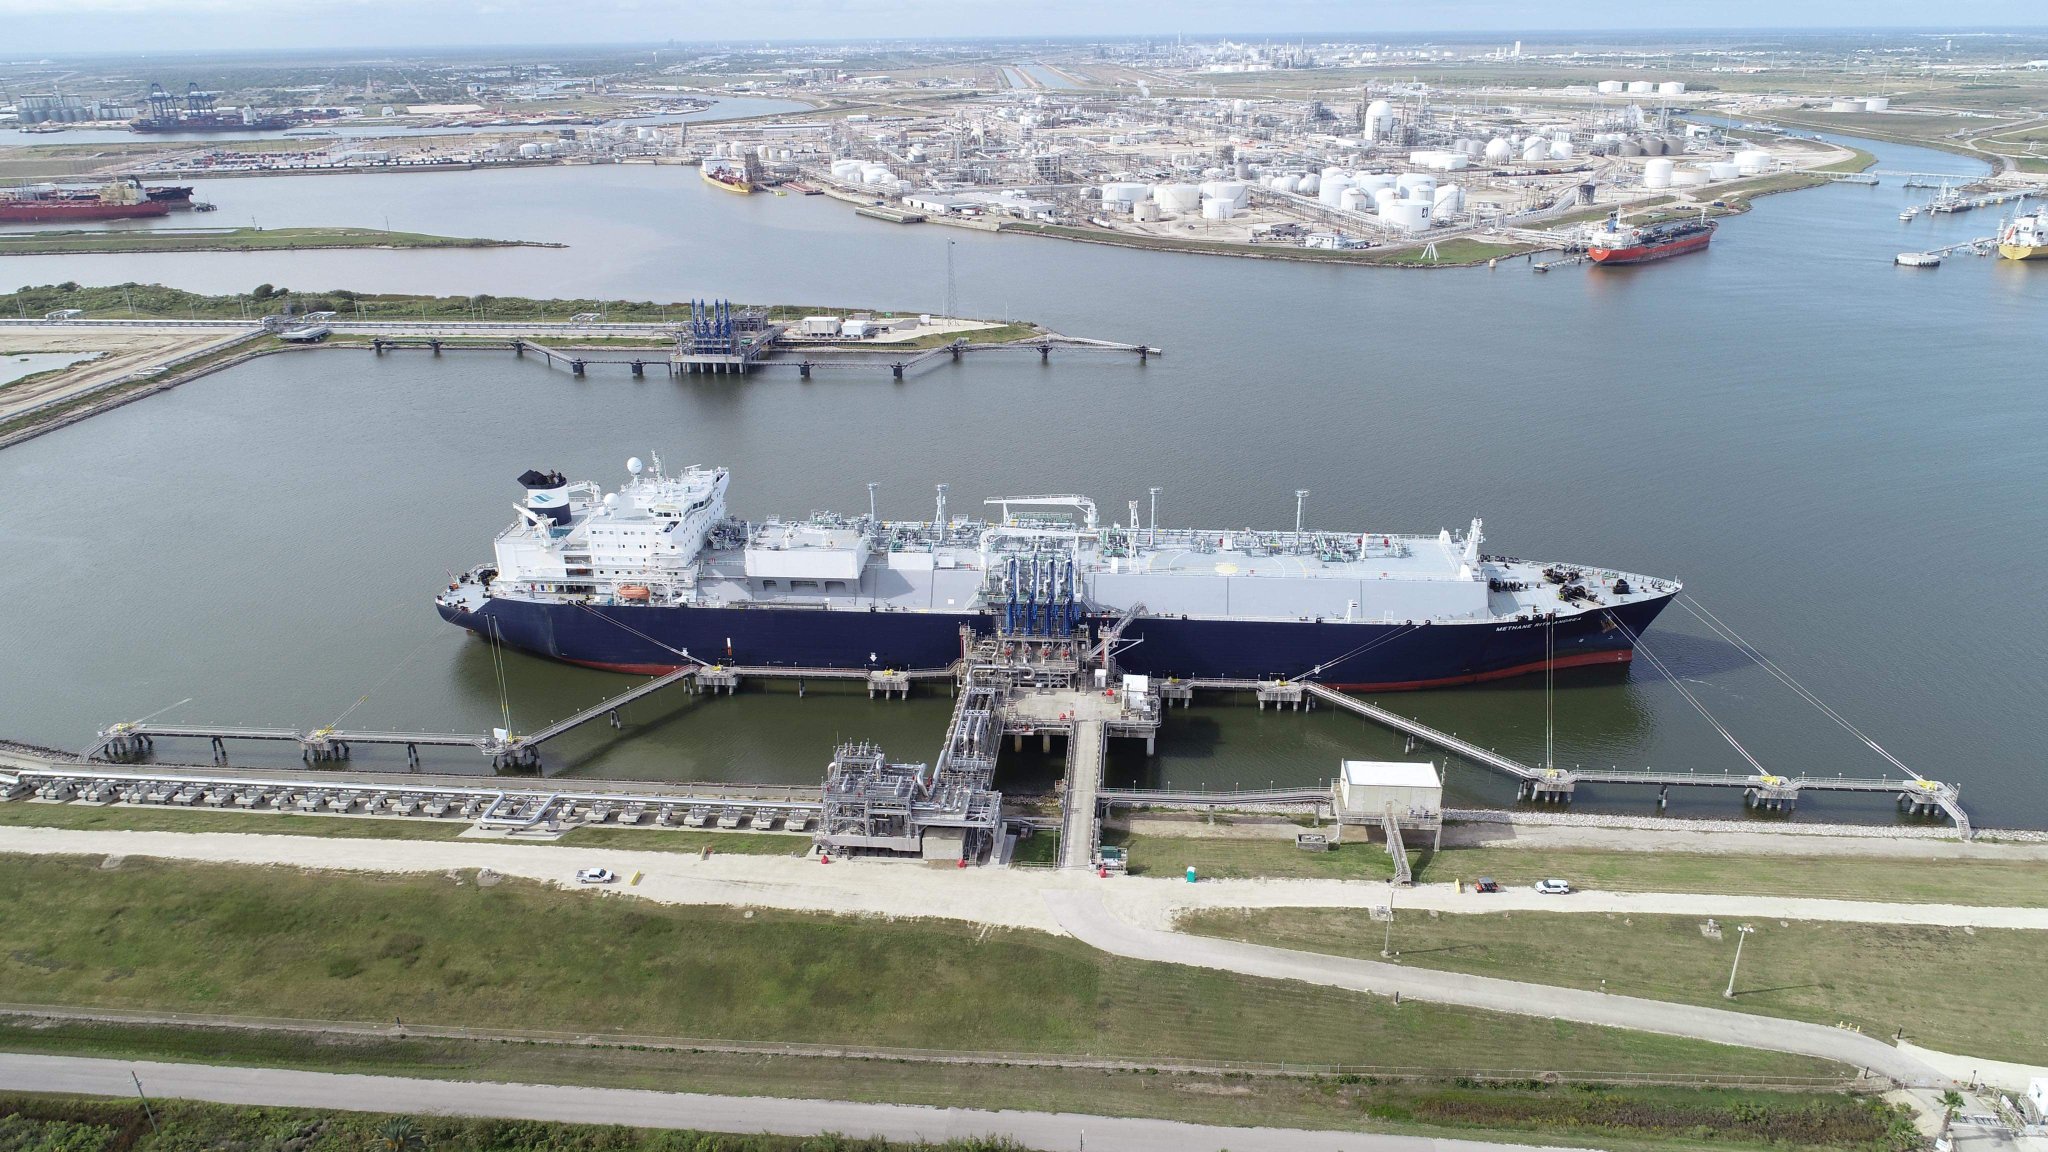 McDermott, Chiyoda and Zachry Group Announce First Cargo from Freeport LNG Train 2